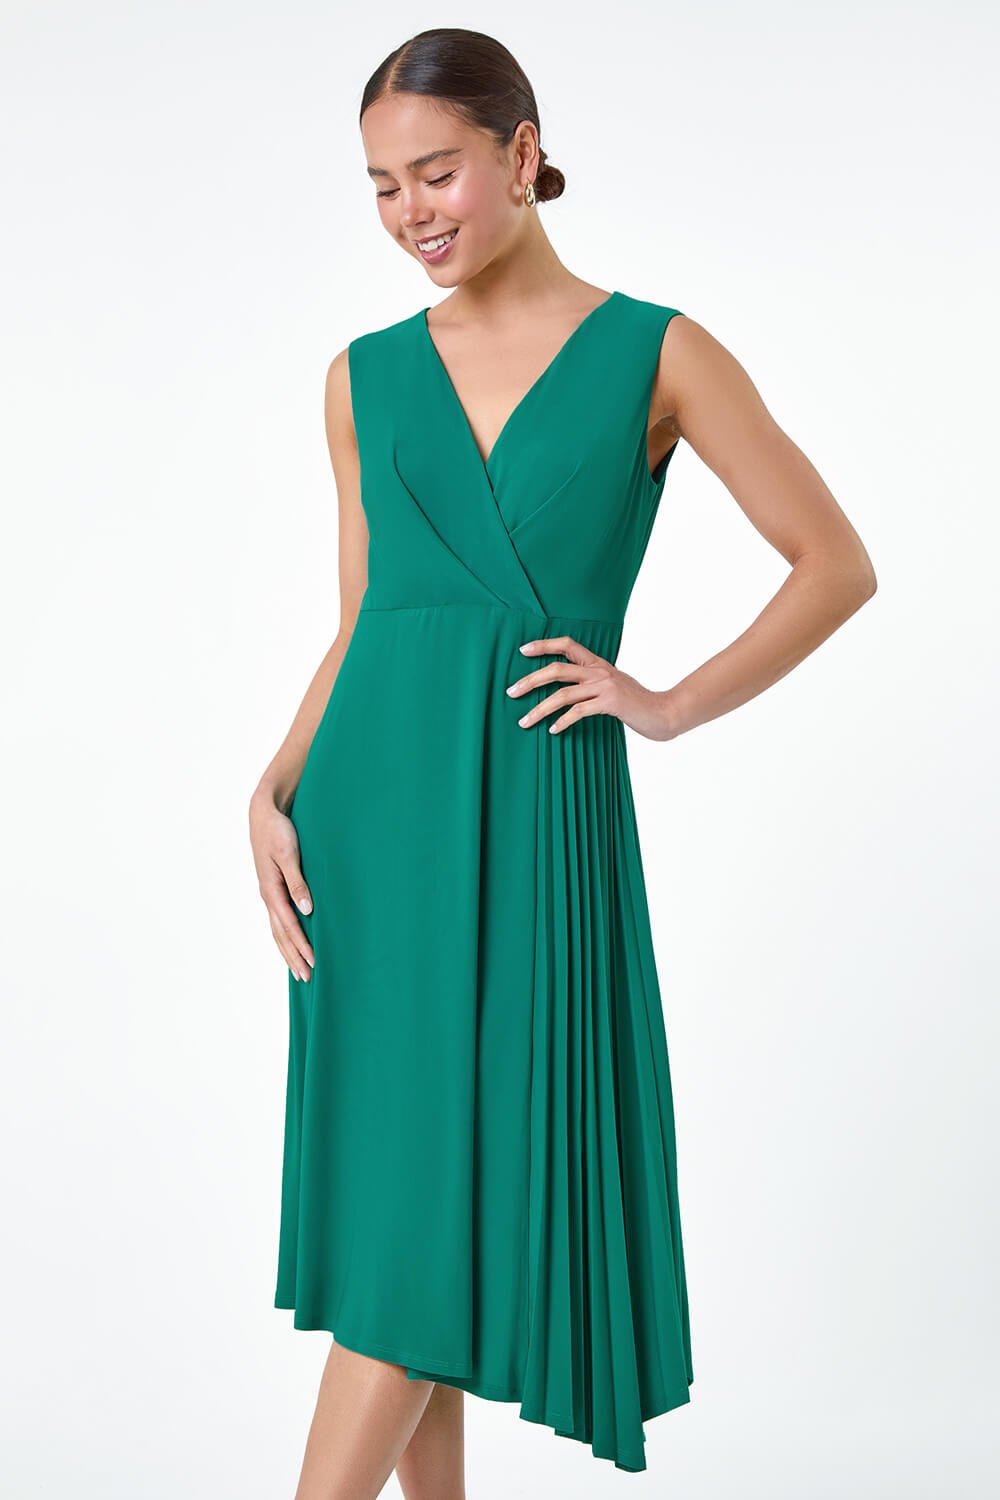 Teal Petite Pleat Detail Stretch Wrap Dress, Image 2 of 5